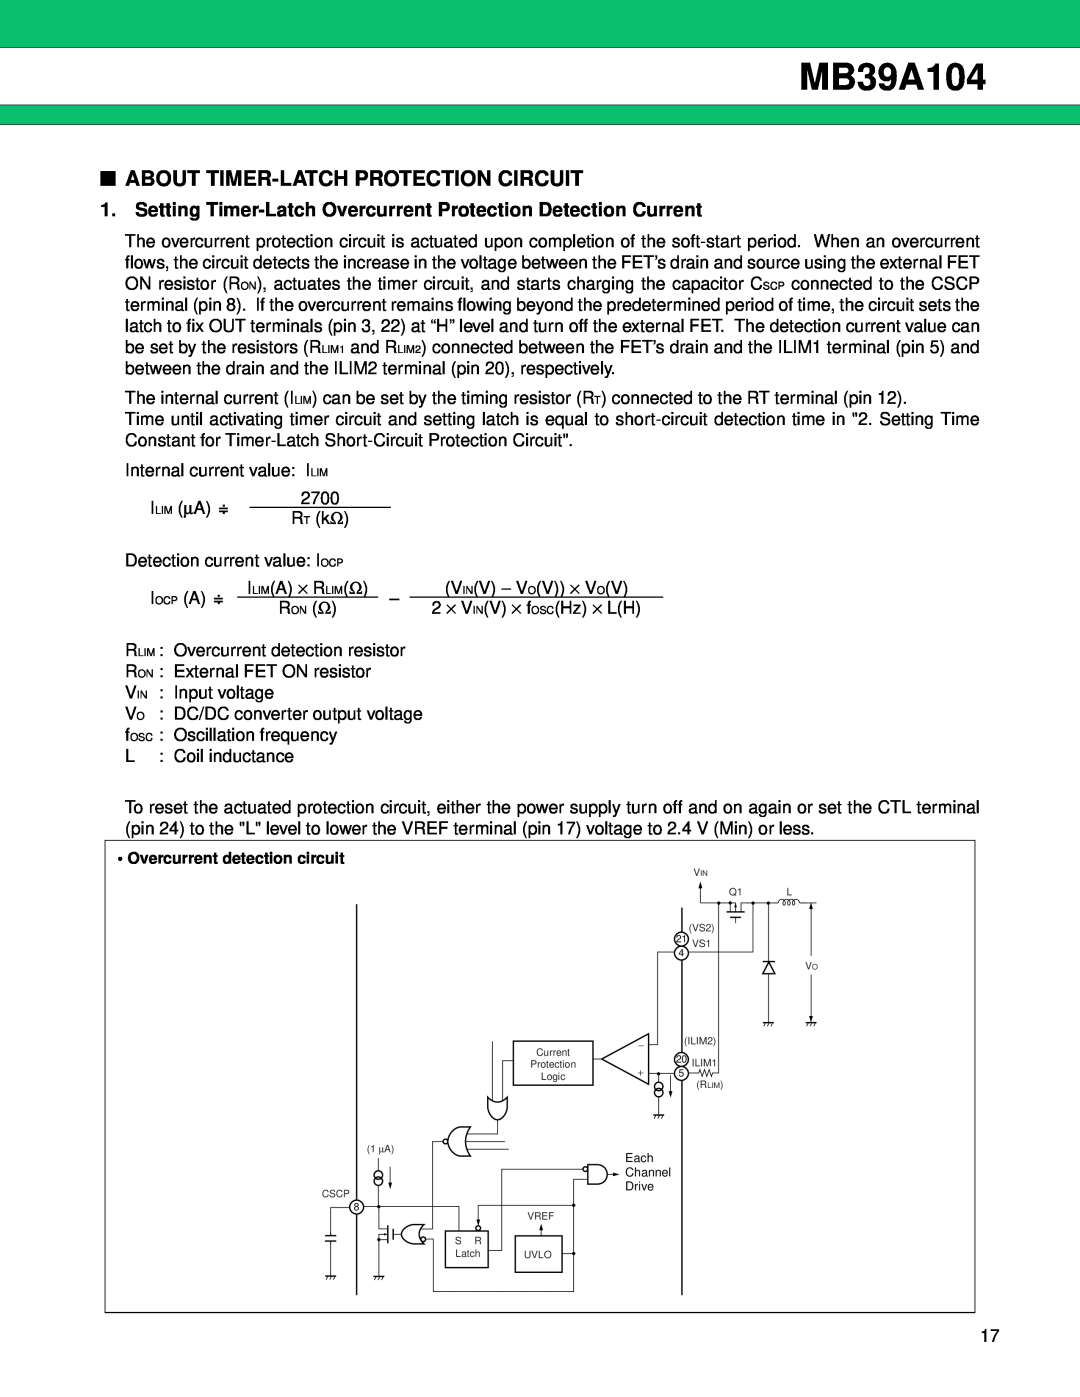 Fujitsu MB39A104 manual About Timer-Latch Protection Circuit, Setting Timer-Latch Overcurrent Protection Detection Current 